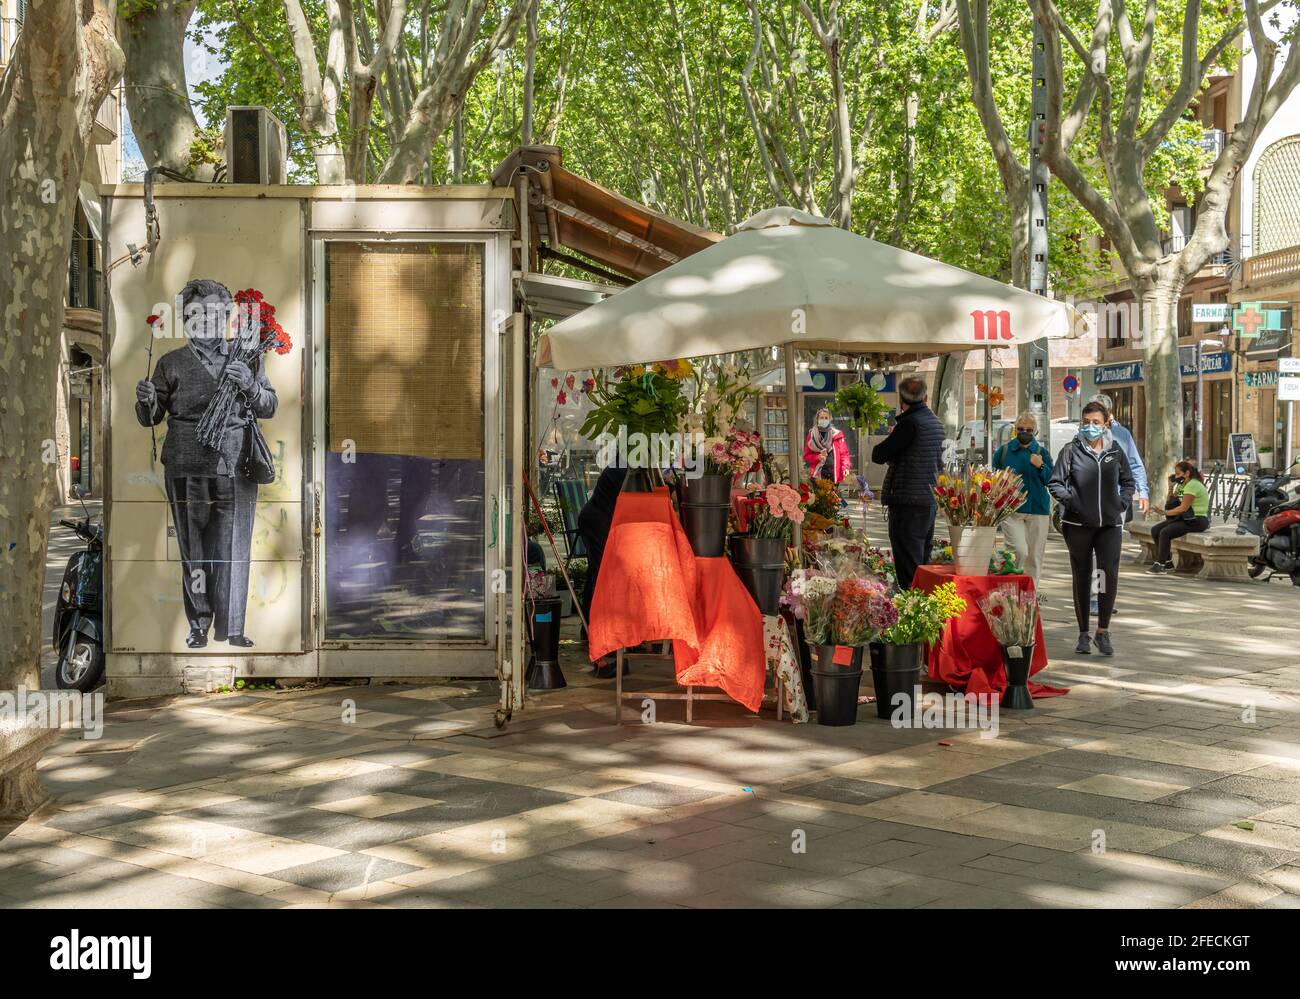 Palma de Mallorca; april 23 2021: Festivity of Sant Jordi or Book Day in times of the Coronavirus pandemic. Urban stalls selling flowers and roses in Stock Photo